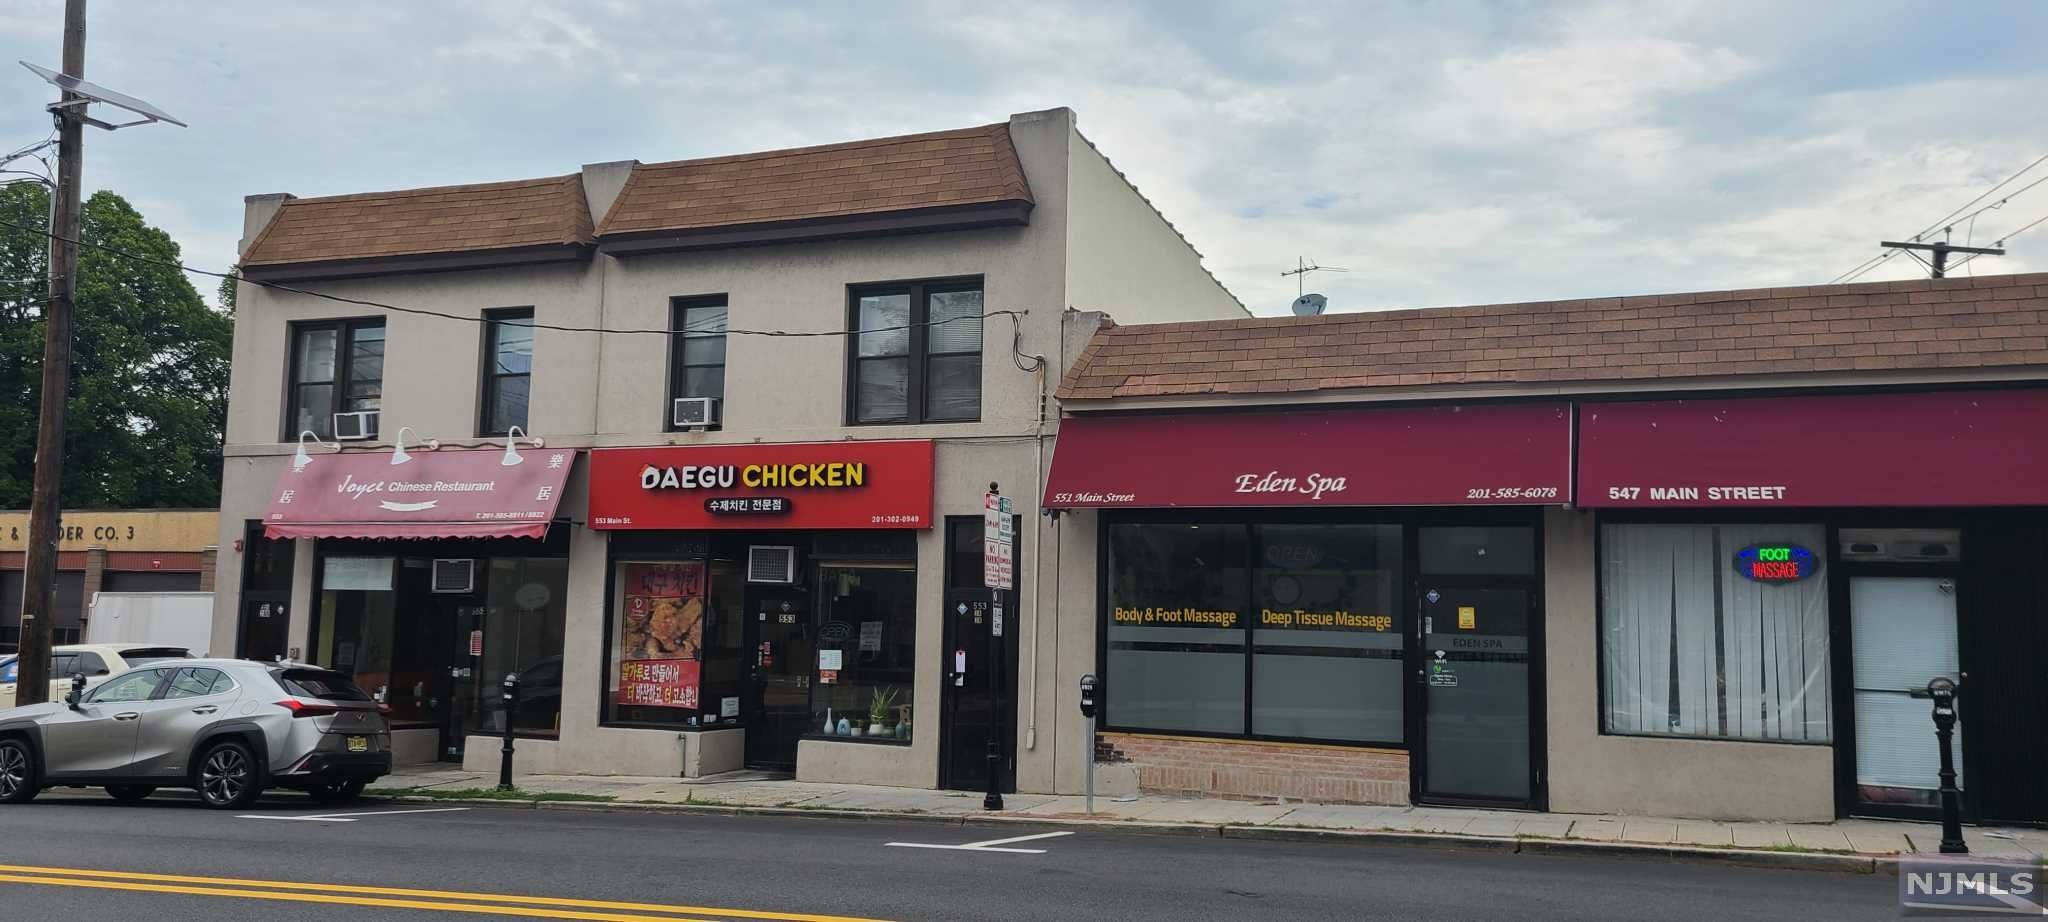 MLS Number 22029256 - Commercial Property for $ 3, - 553 Main Street, Fort  Lee, NJ - New Jersey Multiple Listing Service